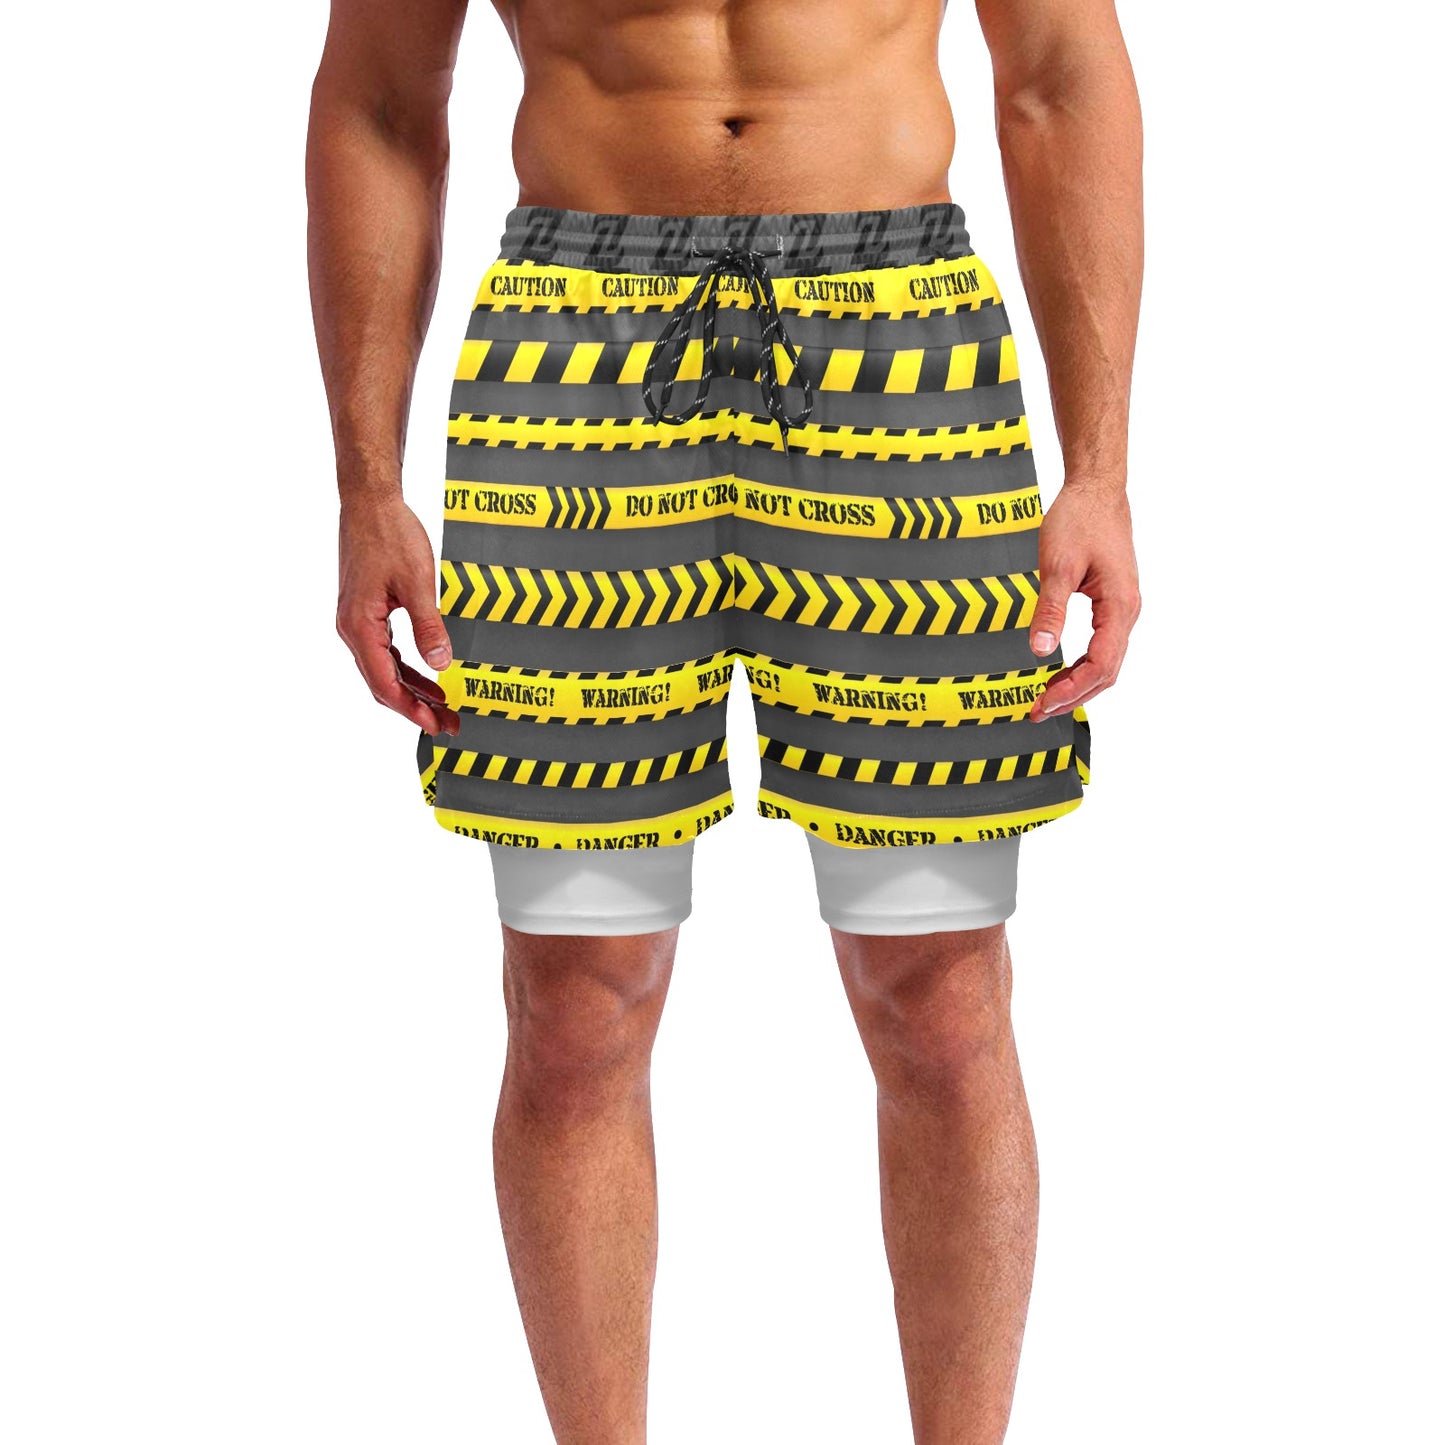 Zen Shorts with Liner - Caution